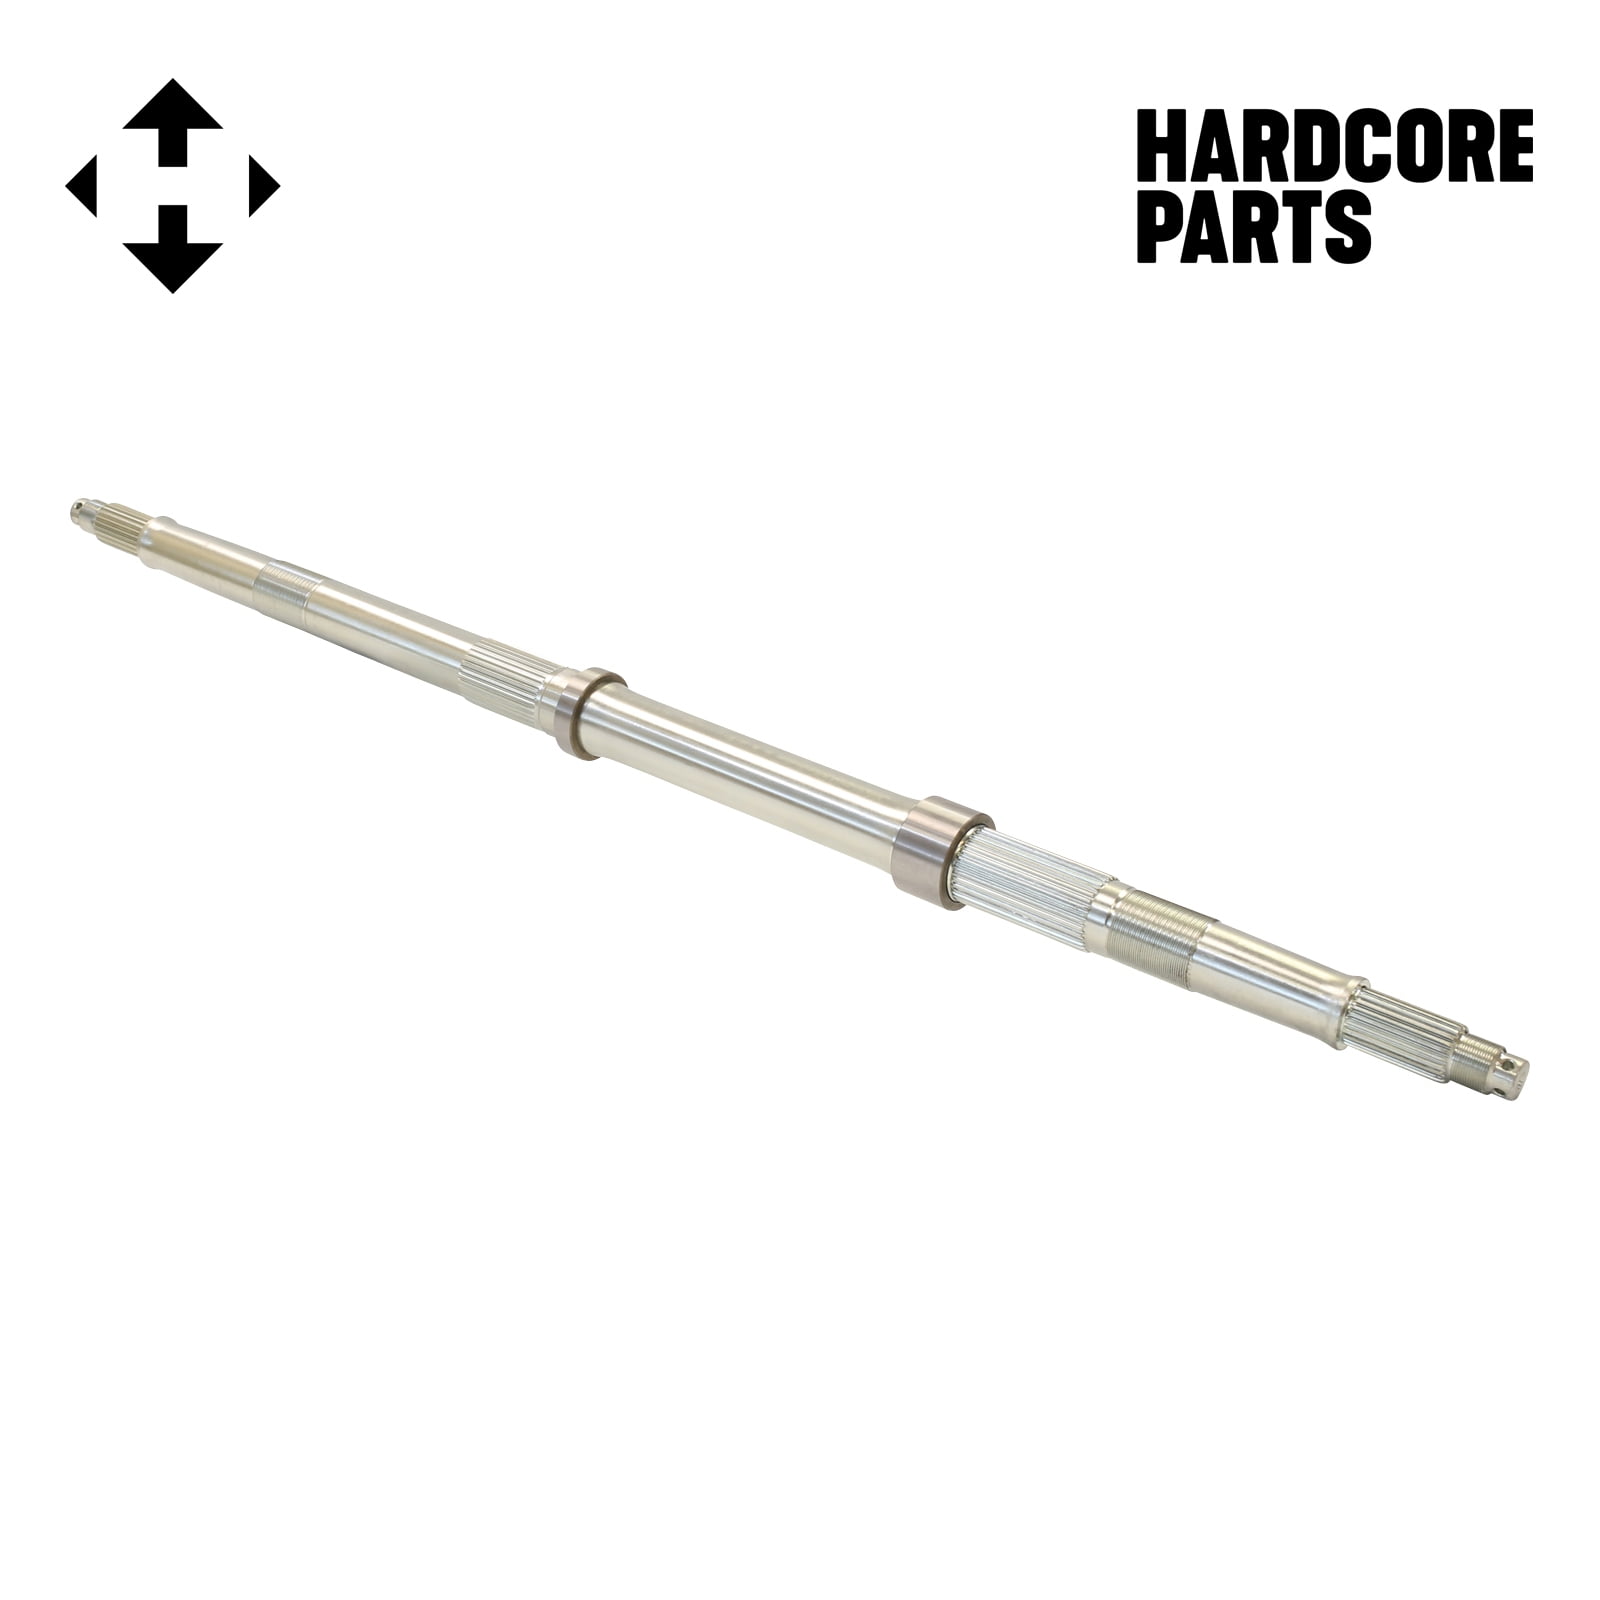 East Lake Axle Rear wheel axle compatible with Honda TRX 420 Rancher Fourtrax ES 2007 2008 2009 2010 2011-2013 